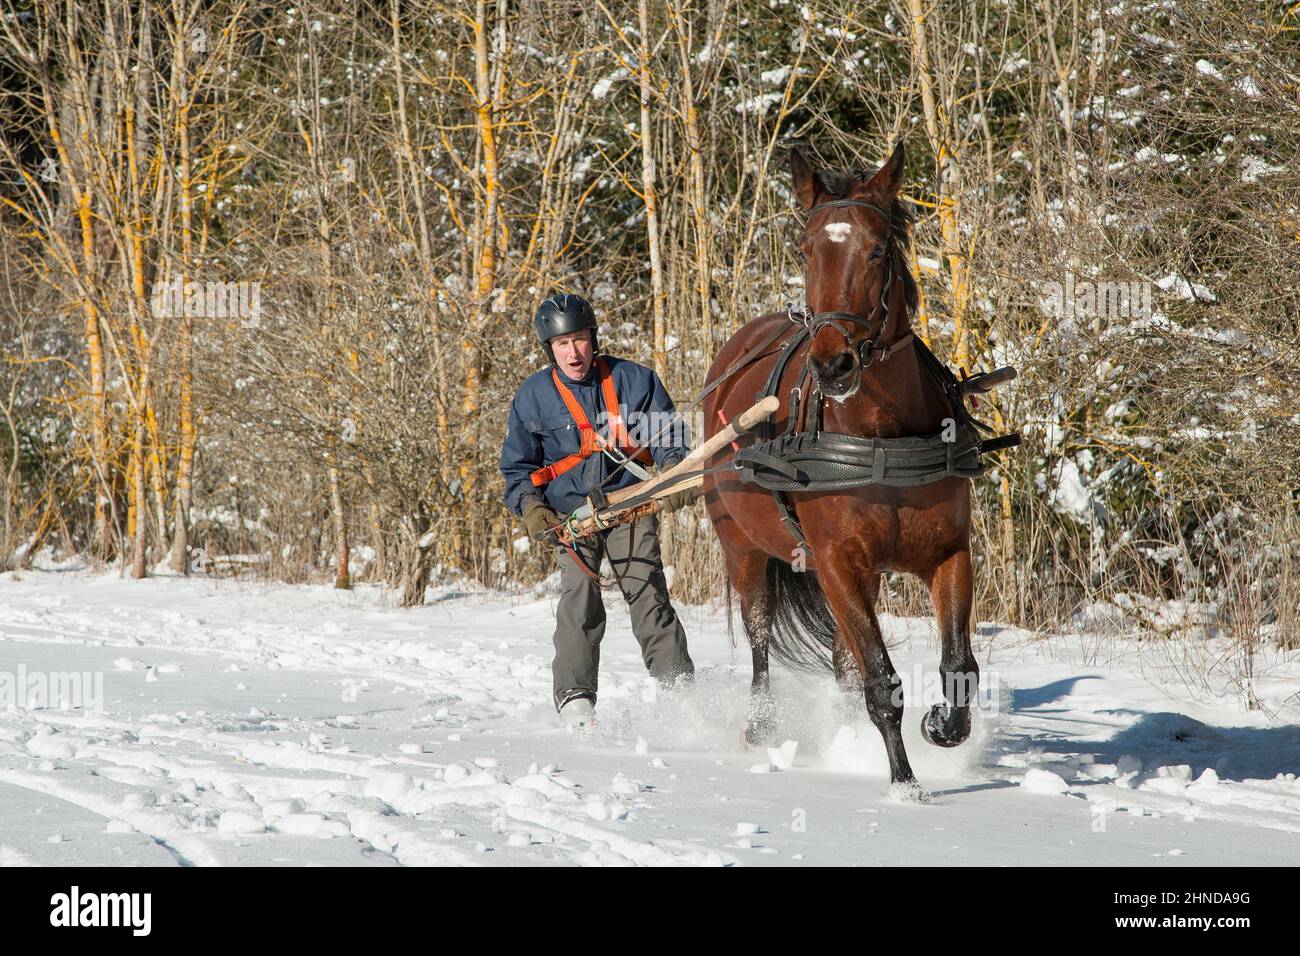 Skioring, winter sports with horse. The driver pushes his horse to make it run faster. Skijoring is a winter sport, which has its roots in Scandinavia Stock Photo